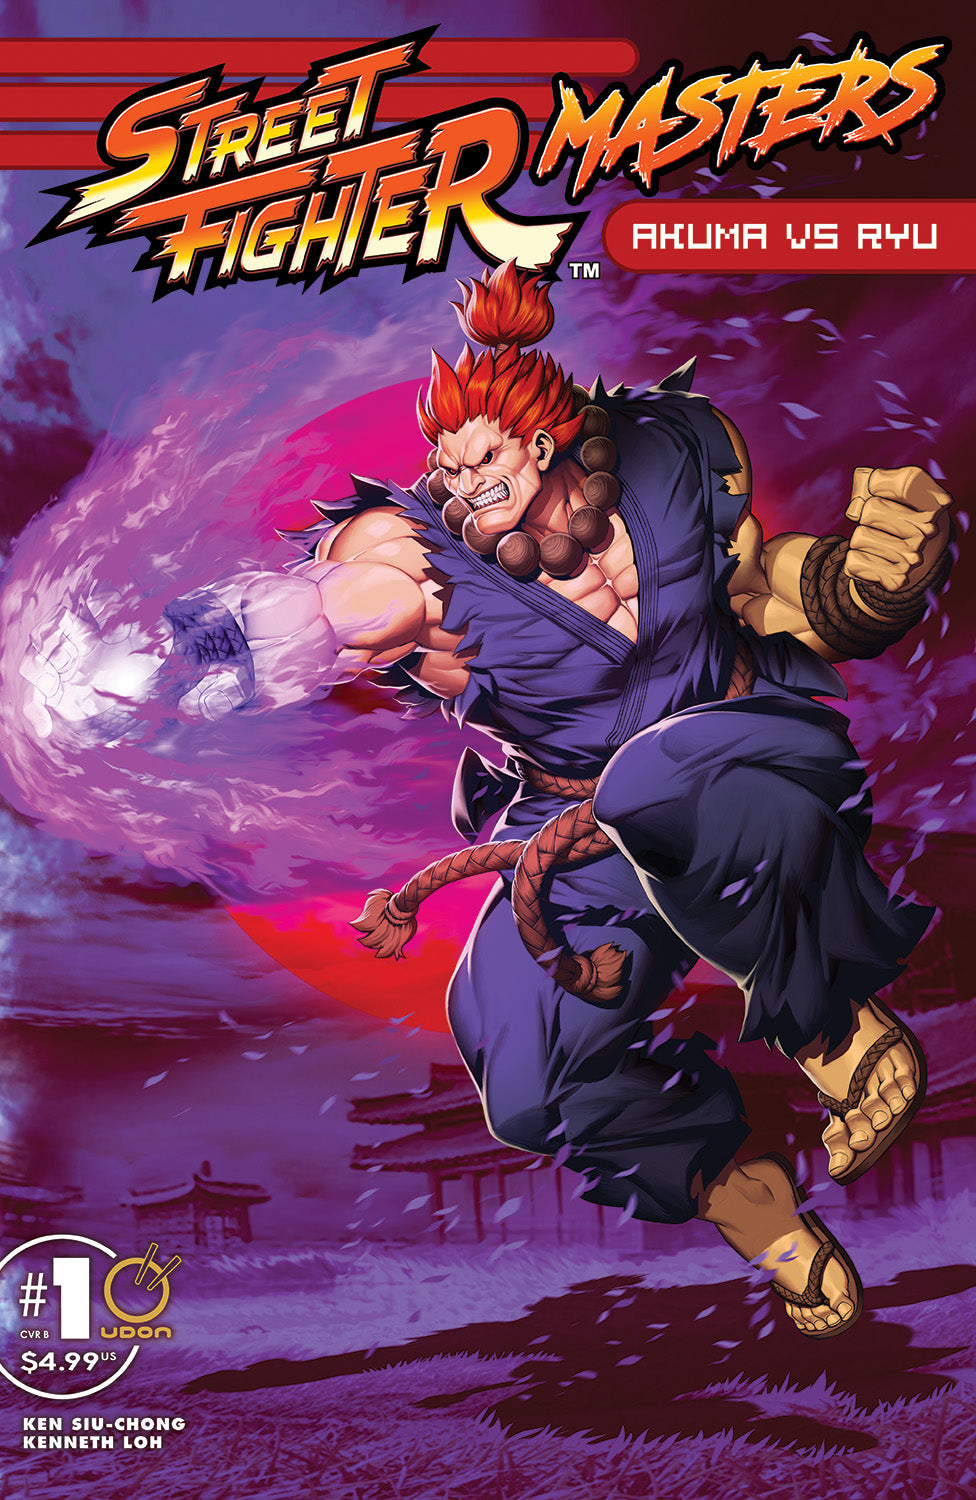 AKUMA IS MY NEW FAVORITE CHARACTER!!! GLOBAL BE AWARE OF HIS POWER